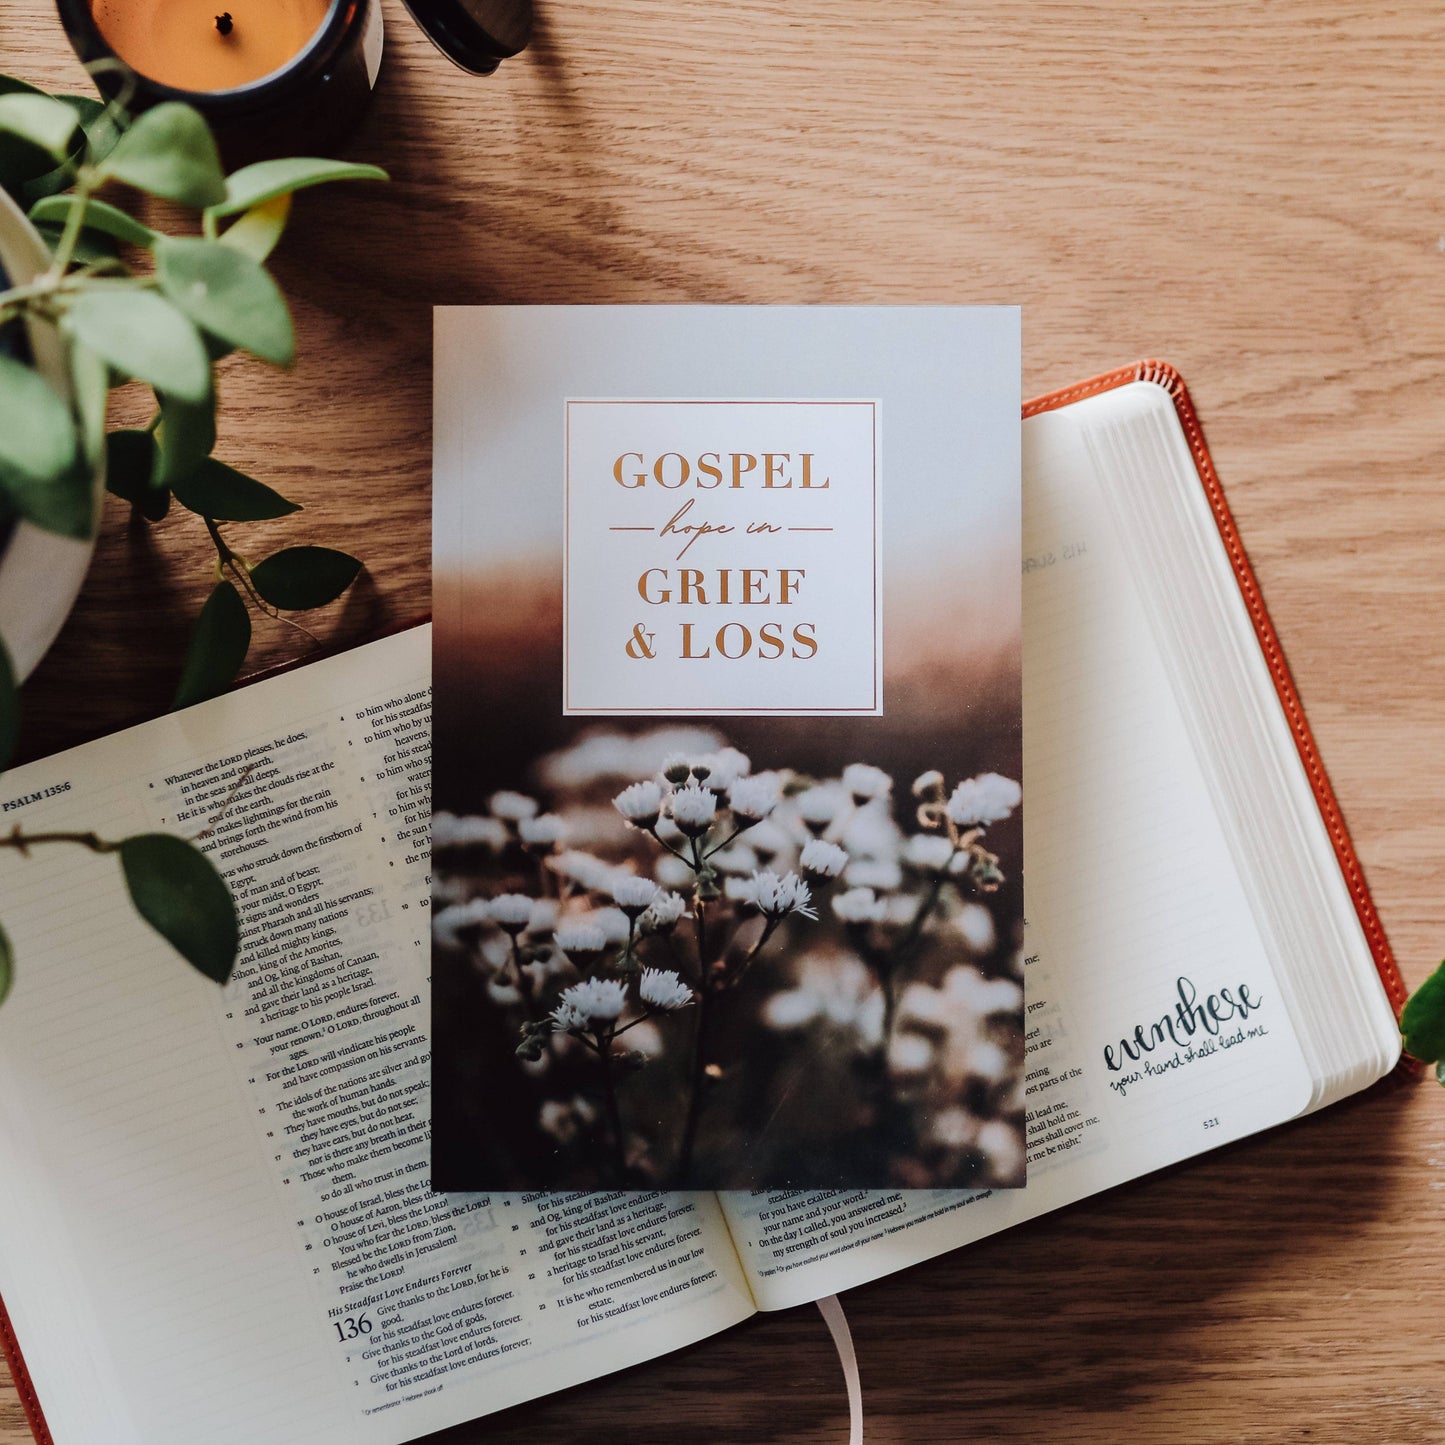 The Daily Grace Co - Gospel Hope in Grief and Loss